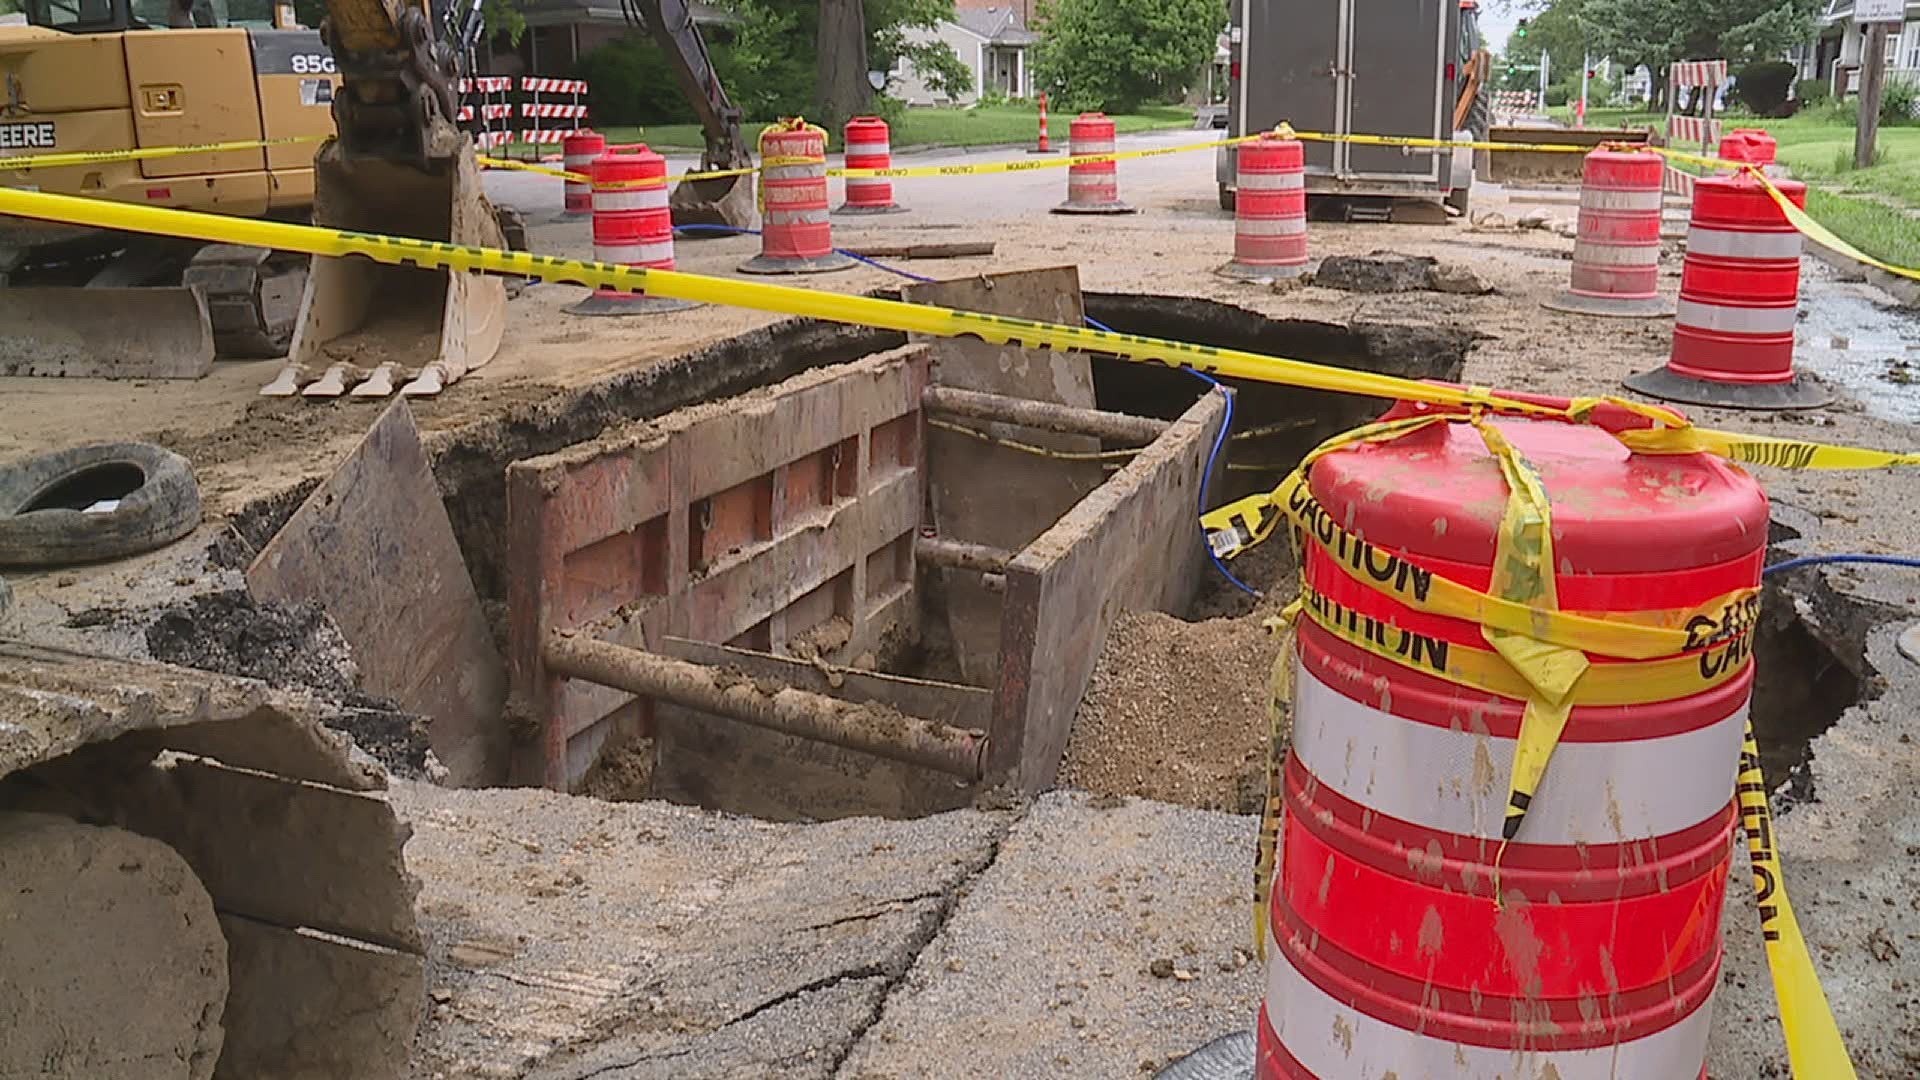 The sinkhole stopped traffic on Locust St., between Kenwood and Woodland Ave.